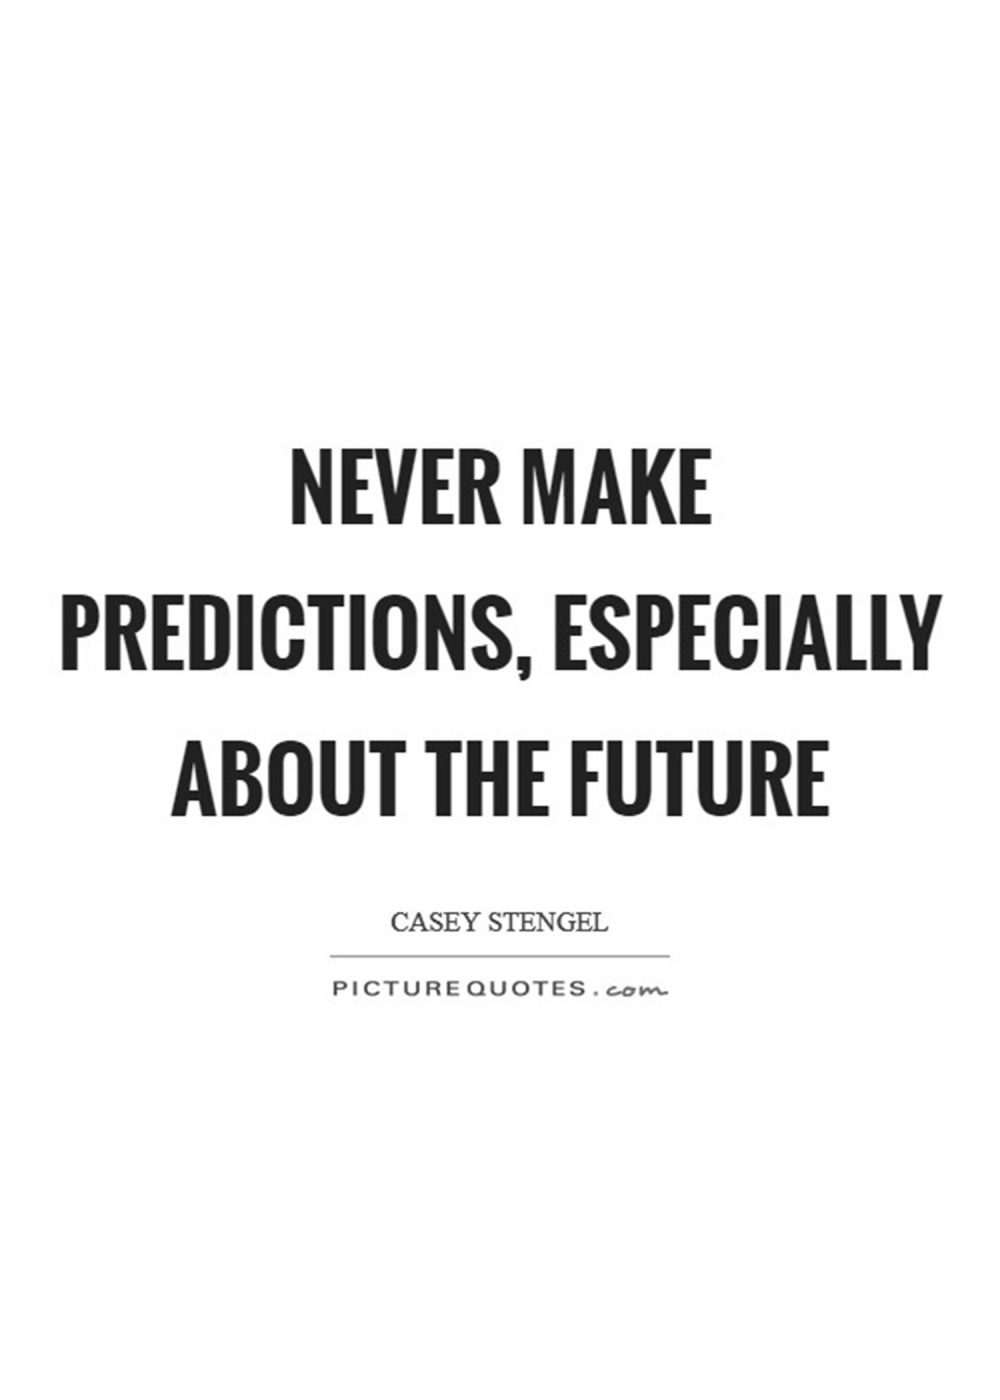 Never make predictions especially about the future quote